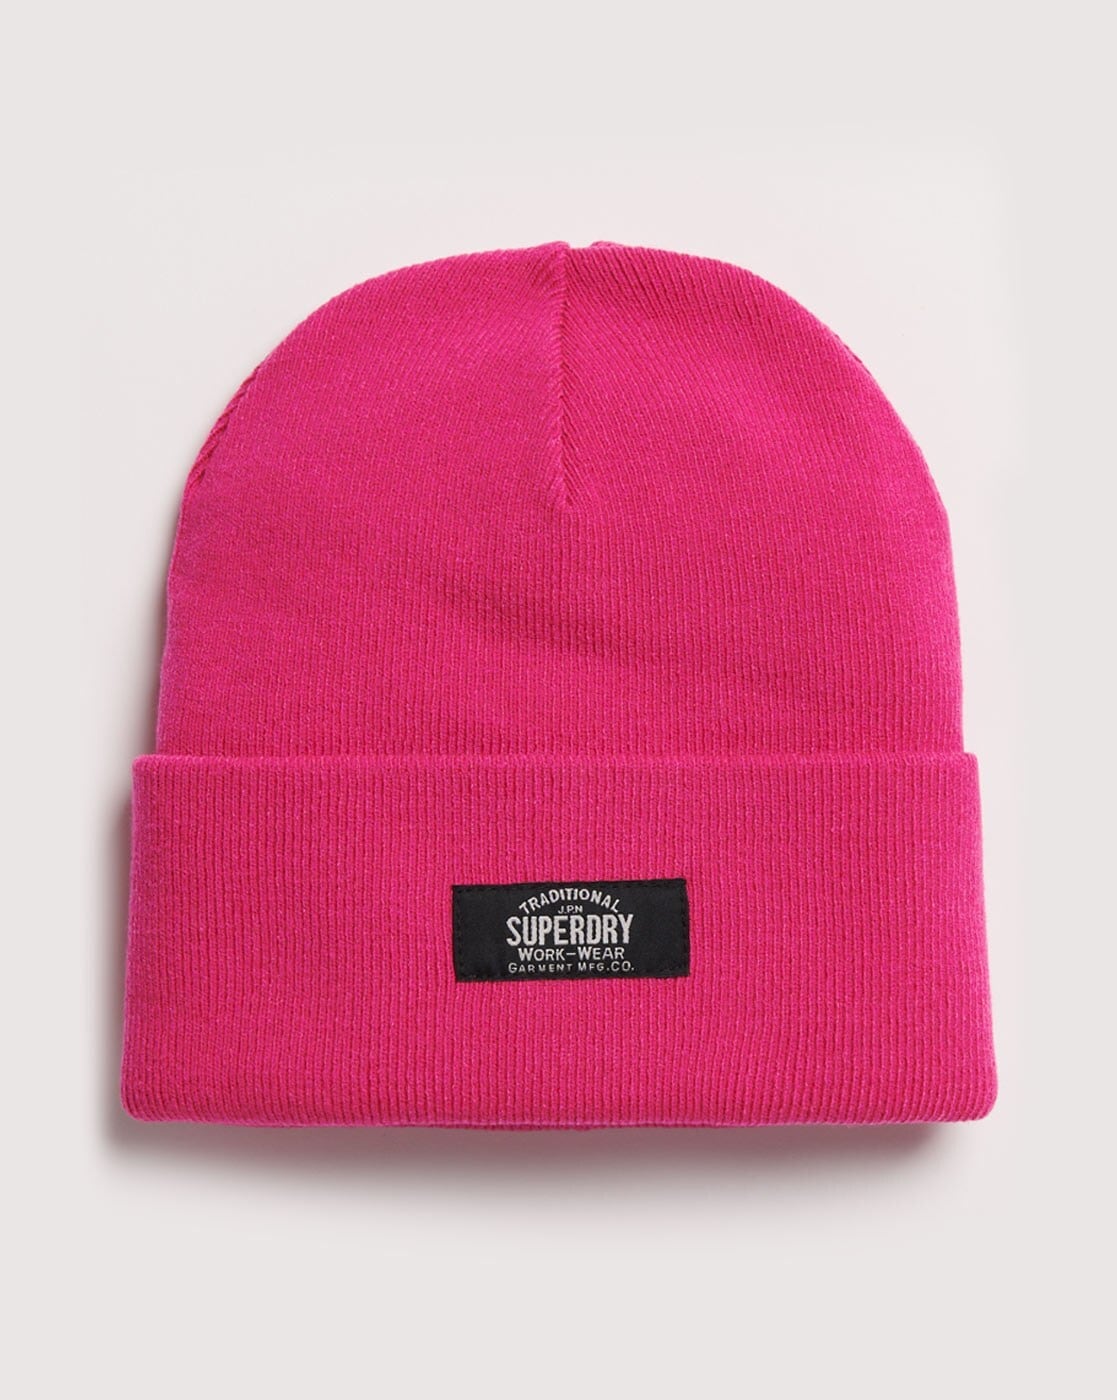 & by Hats SUPERDRY Buy Pink Men for Online Caps